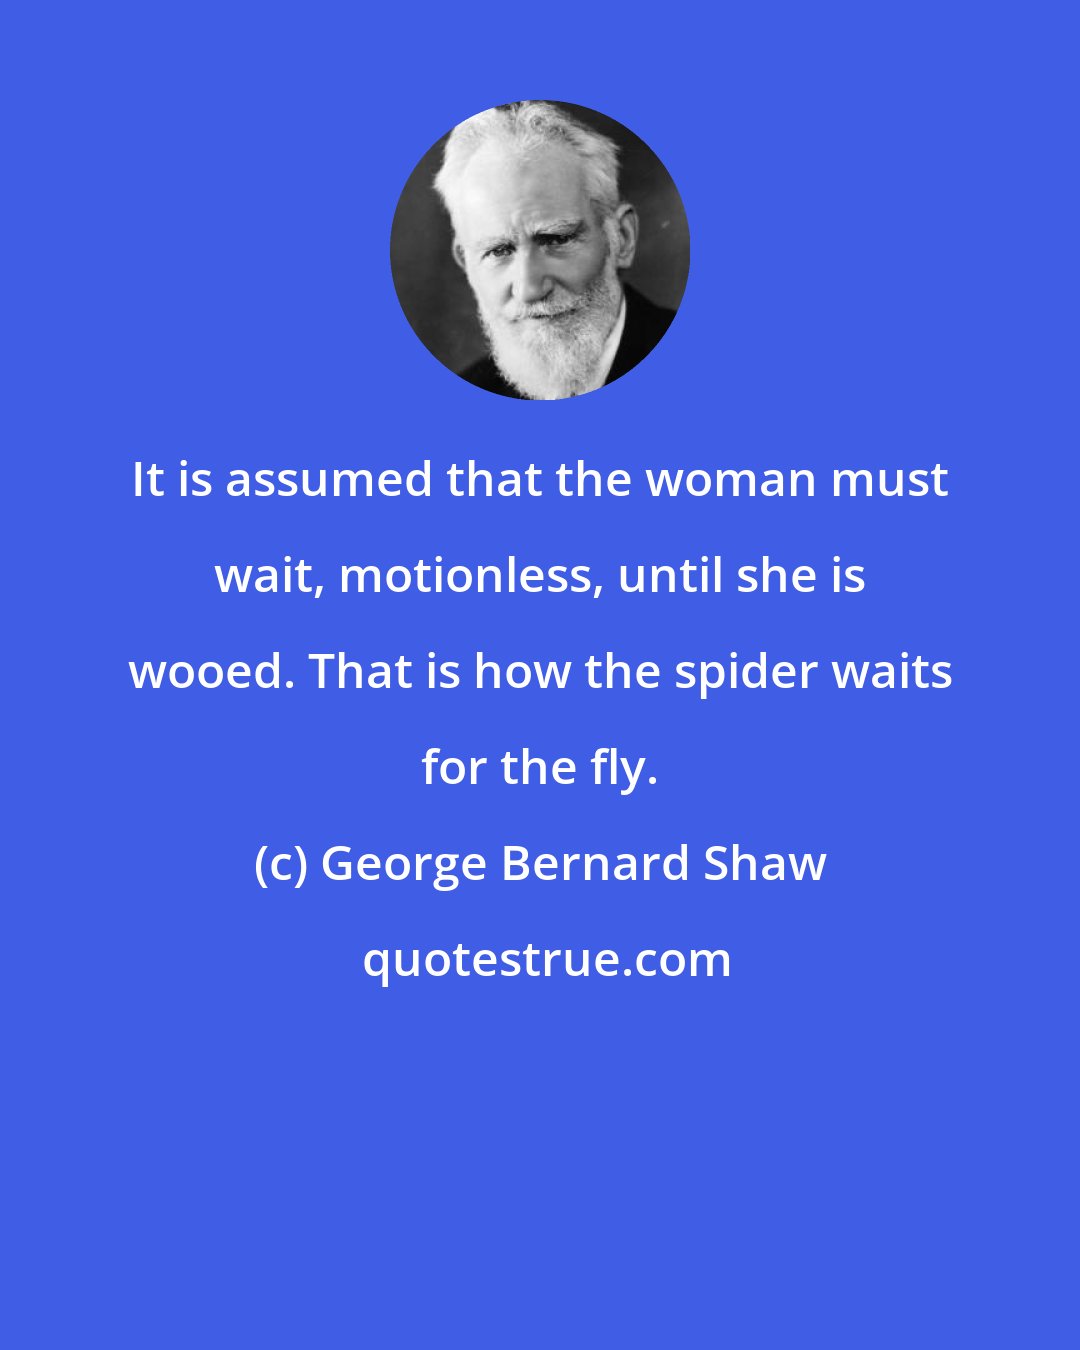 George Bernard Shaw: It is assumed that the woman must wait, motionless, until she is wooed. That is how the spider waits for the fly.